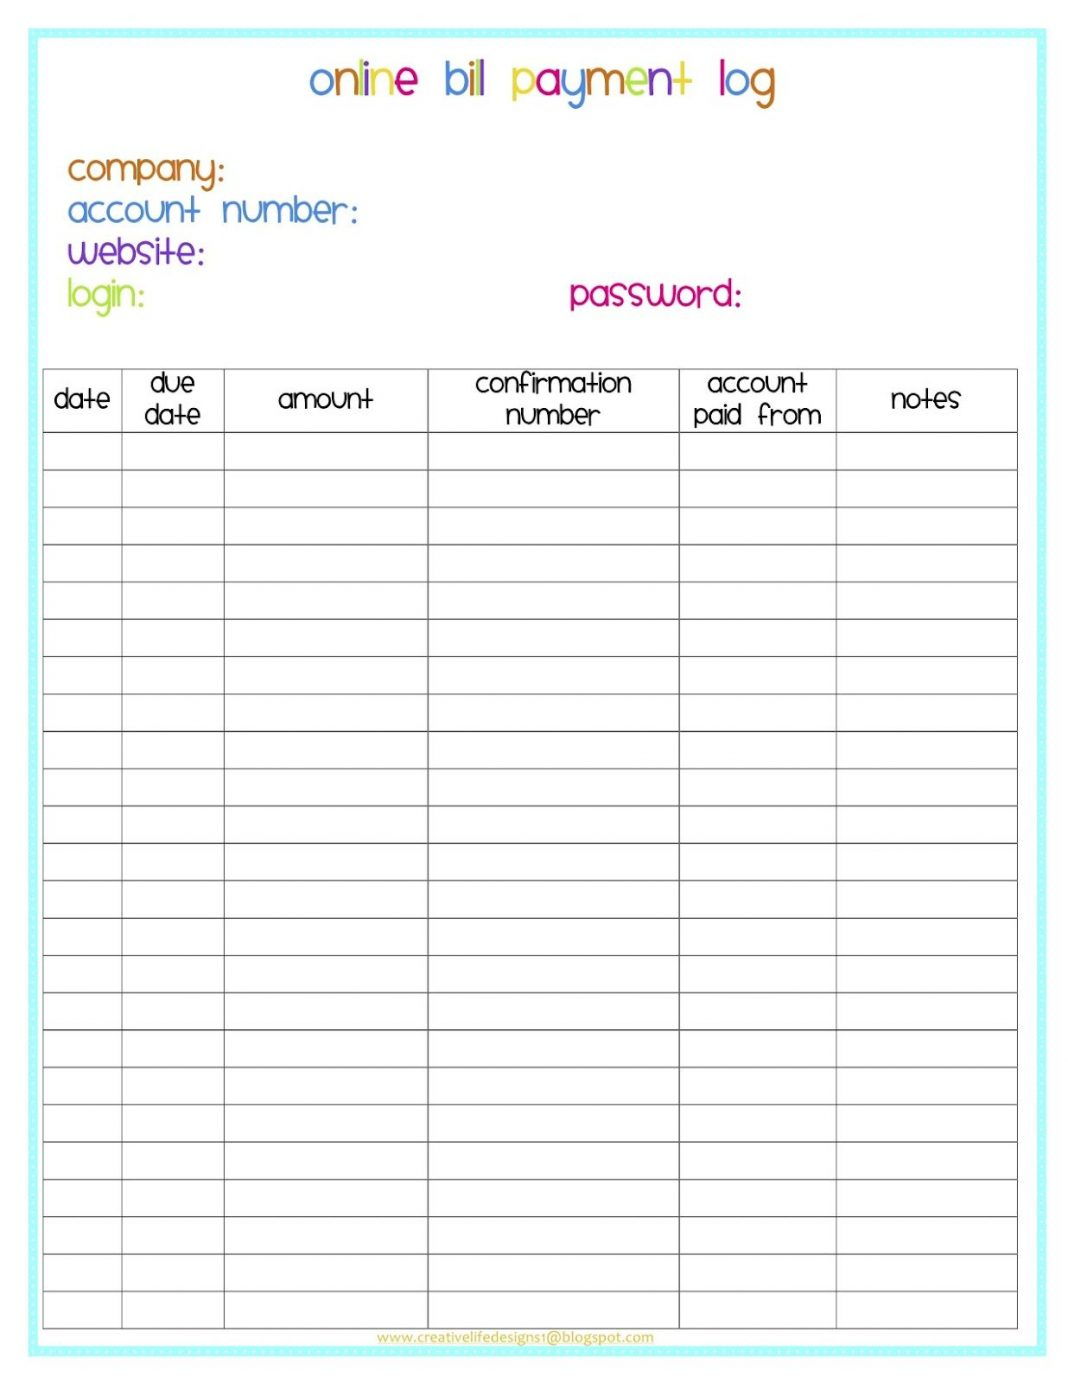 Monthly Bill Payment Log Excel ⋆ Calendar for Planning